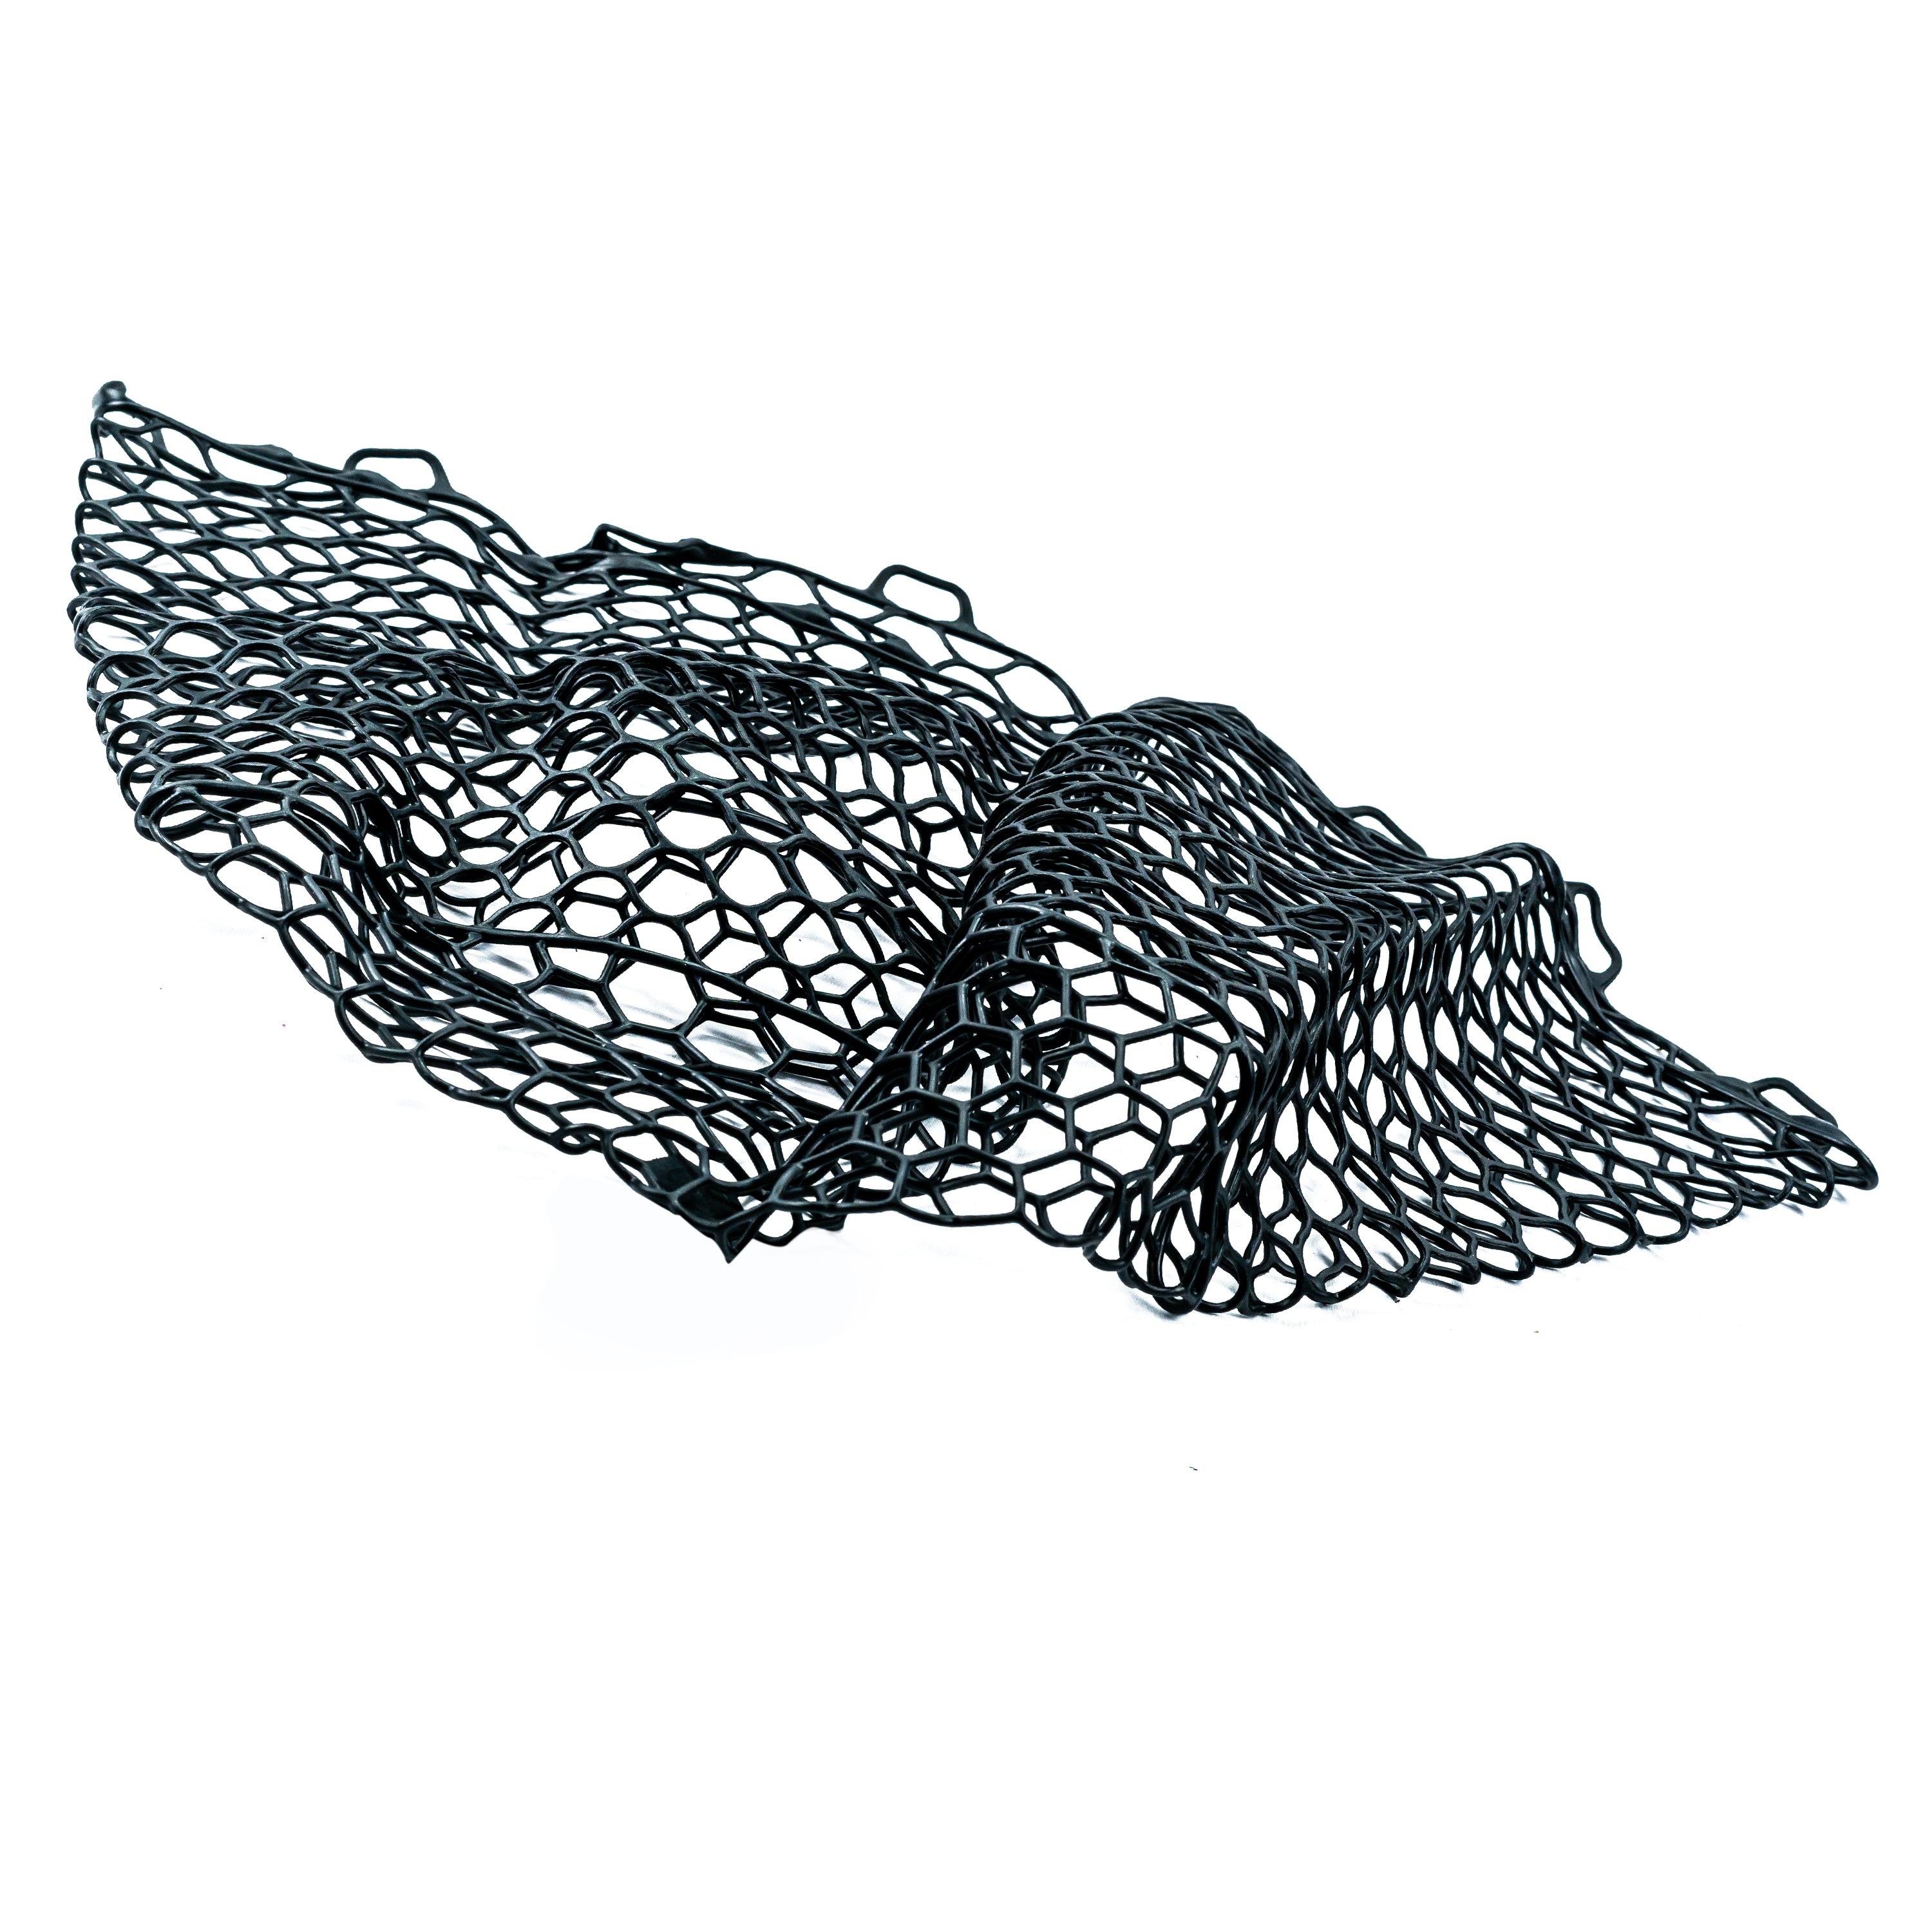 Promar Rubber Replacement Net RN-615 14-18